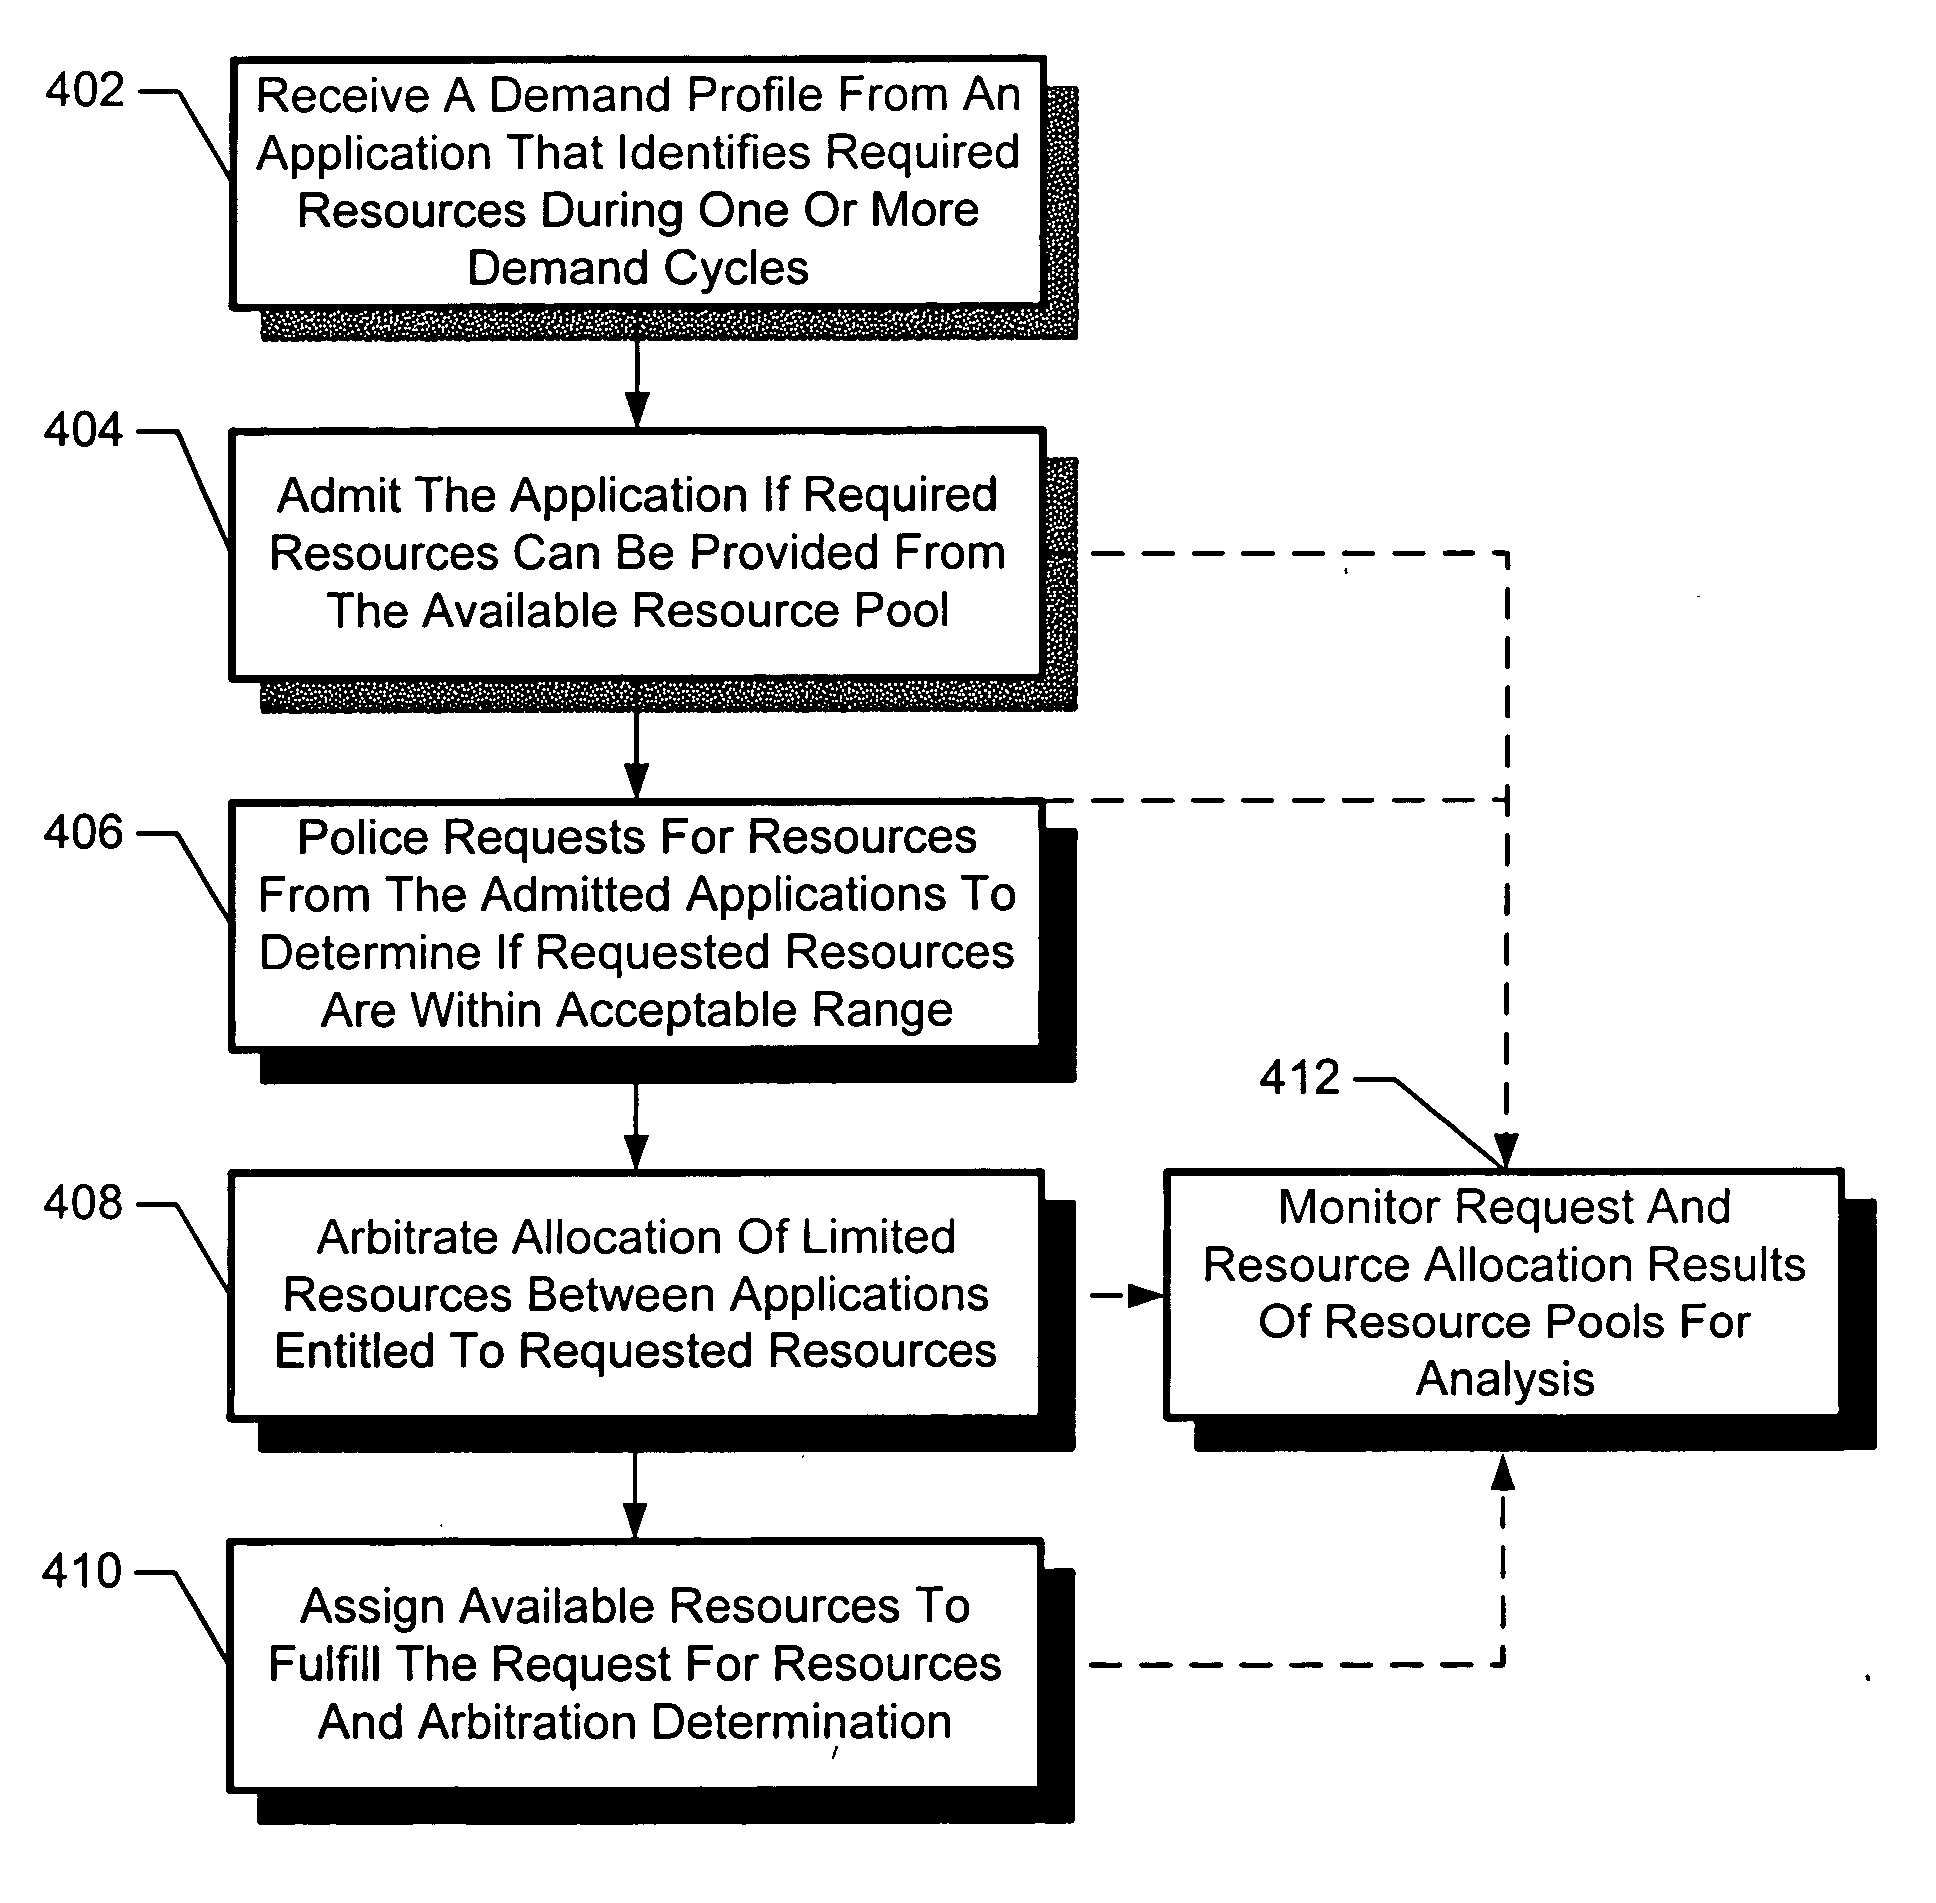 Method and system for governing access to computing utilities